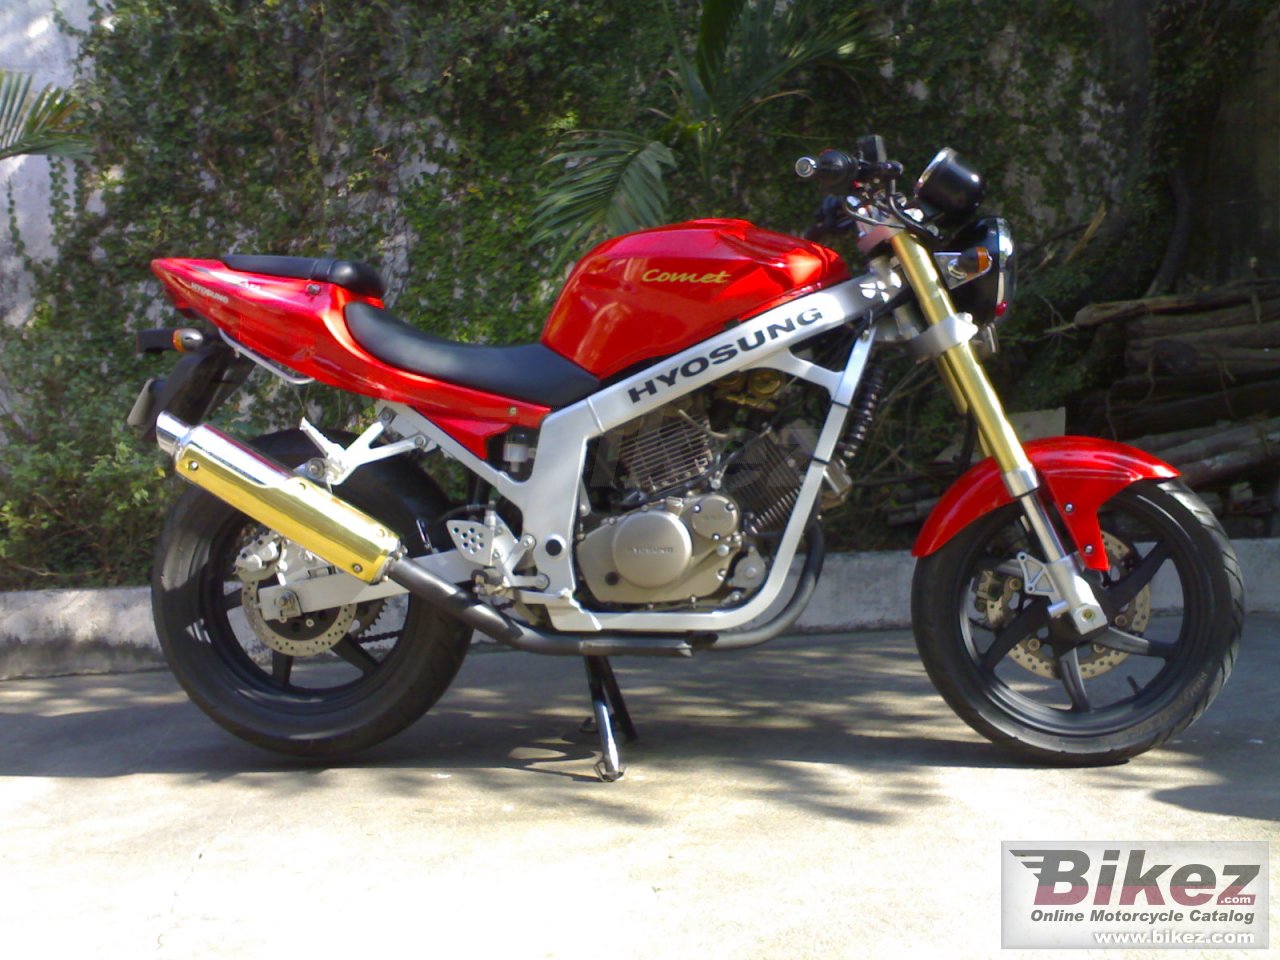 Hyosung GT250 Naked - GT250 Comet